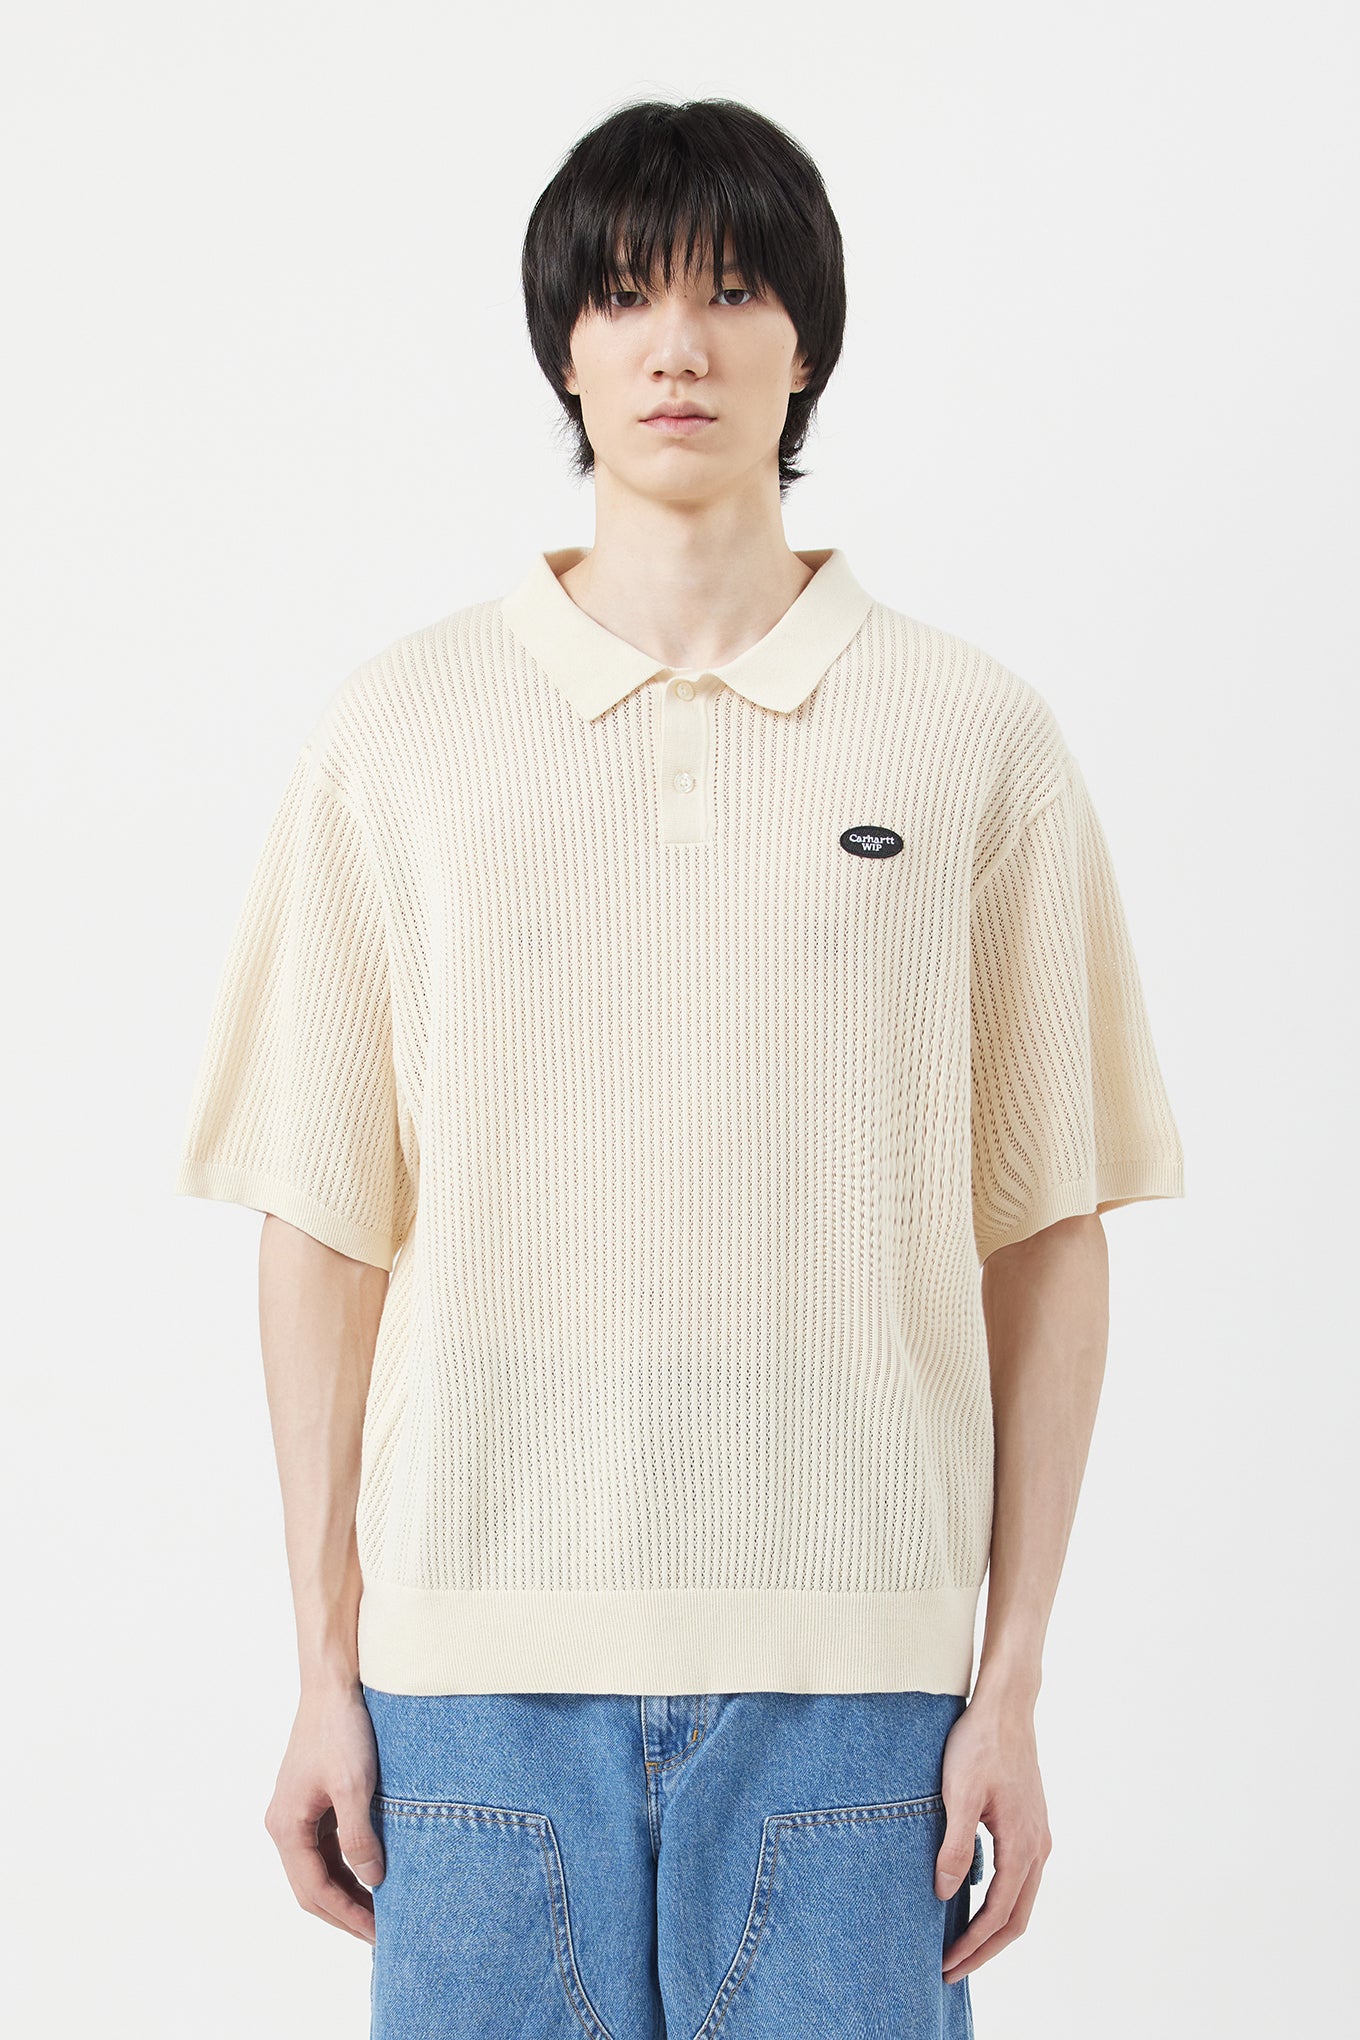 S/S KENWAY KNIT POLO | WORKSOUT WORLDWIDE